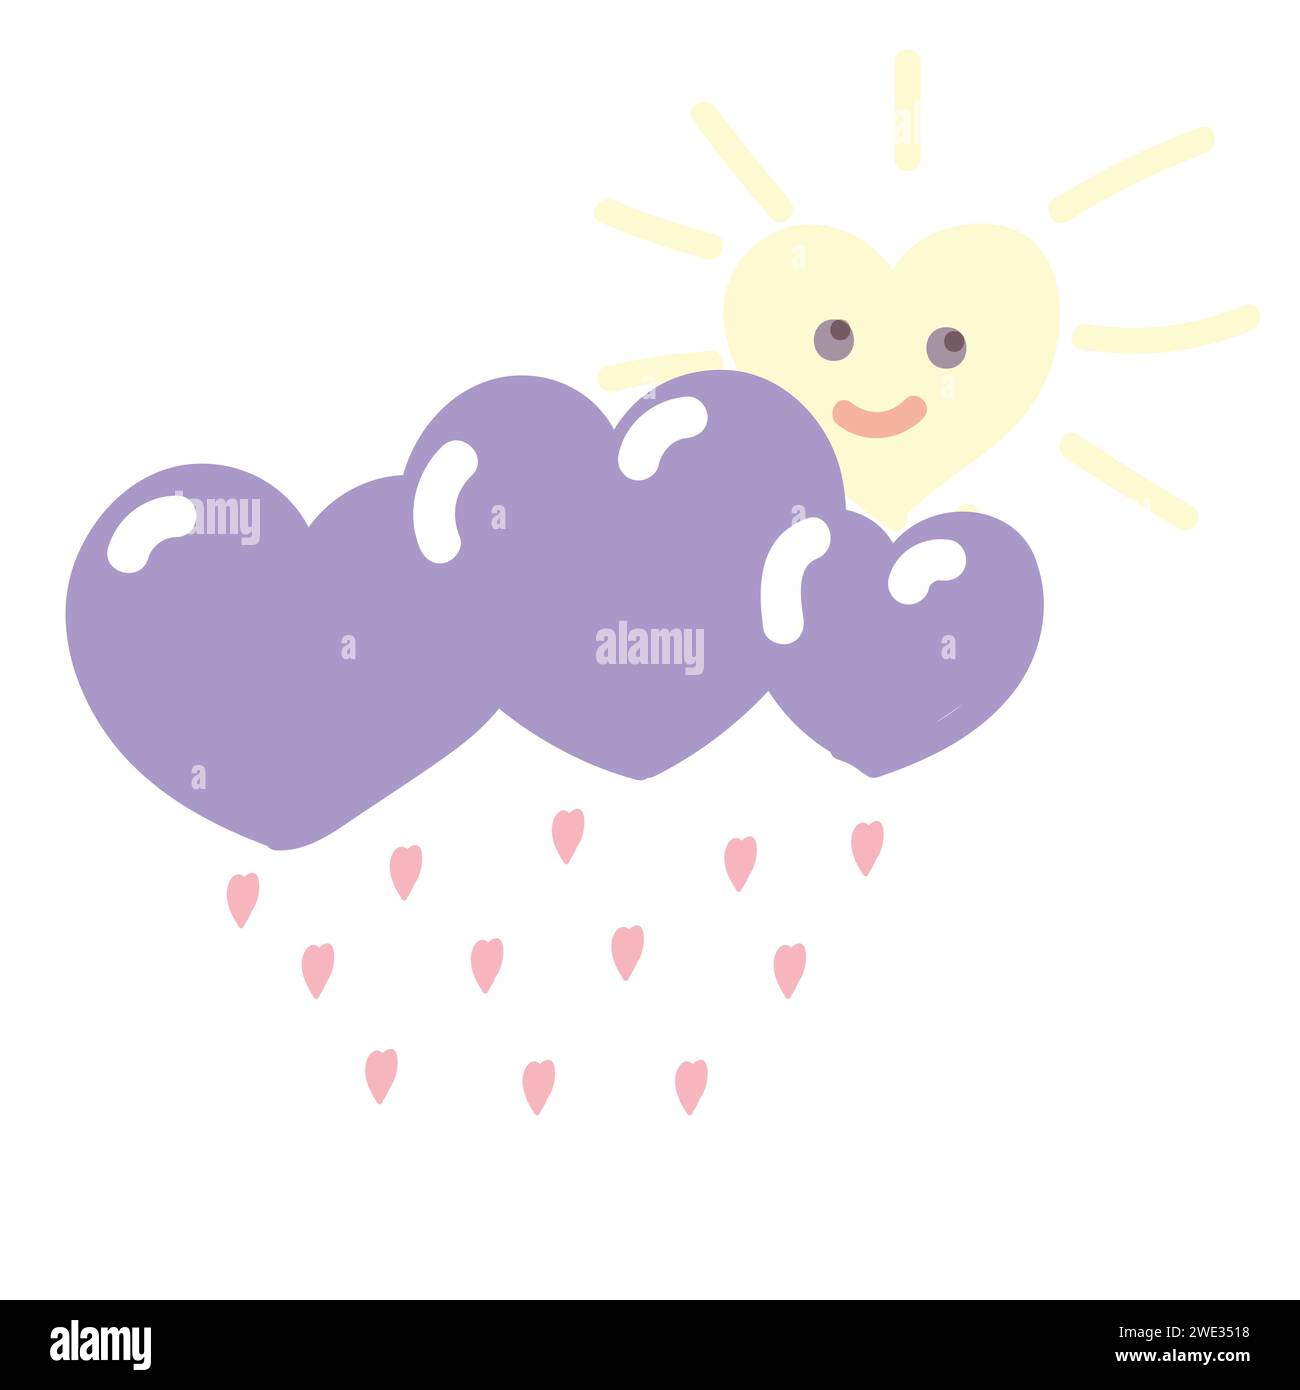 Rain of hearts and a heart shaped sun. Cute picture in bed colors, can be used for Valentines Day design Stock Vector